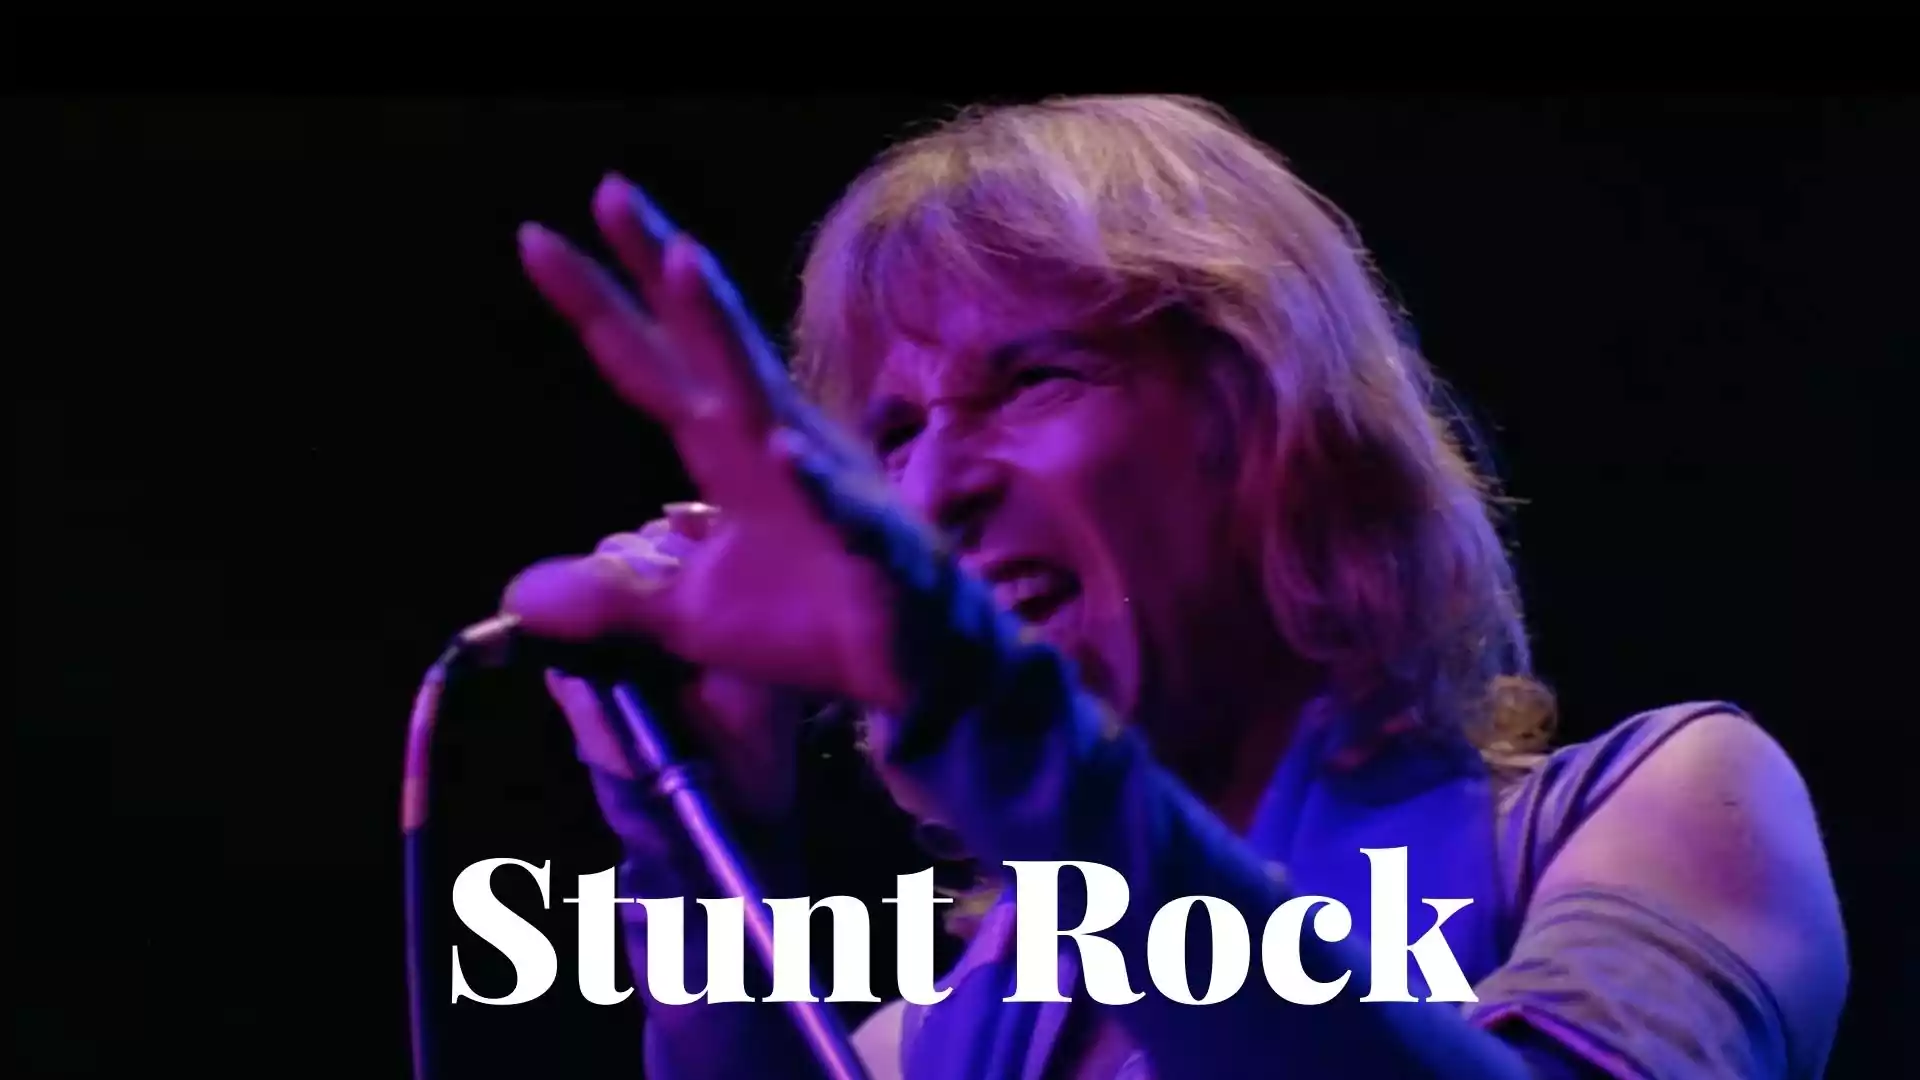 Stunt Rock Parents guide and Age Rating